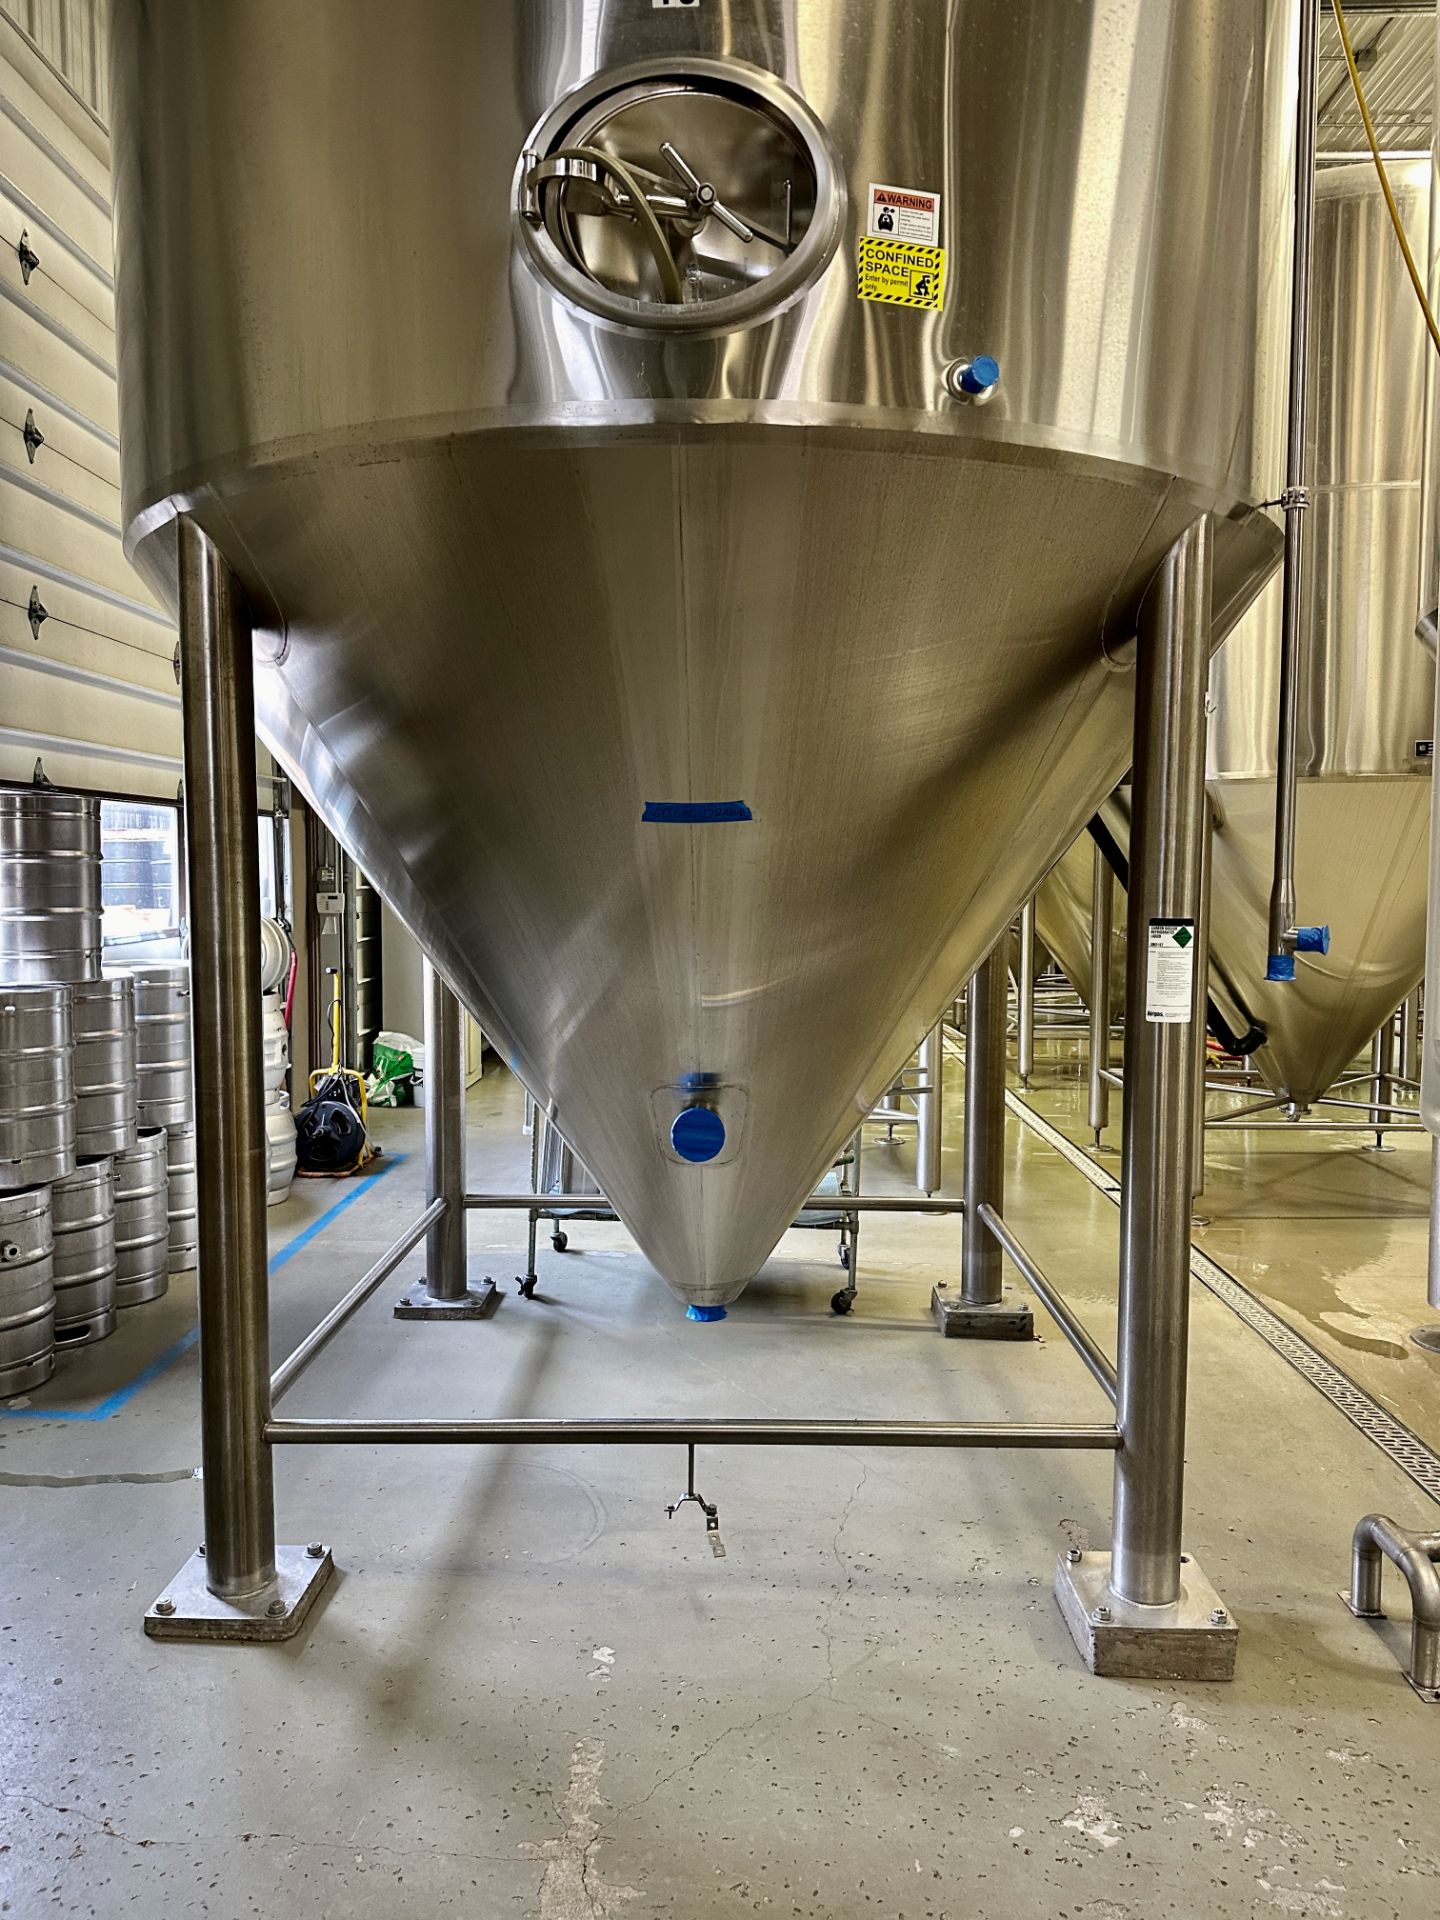 2015 NSI 150 BBL FV or 5,500 Gal Max Capacity Jacketed Fermentation Tank, Glycol Jacketed - Image 2 of 9